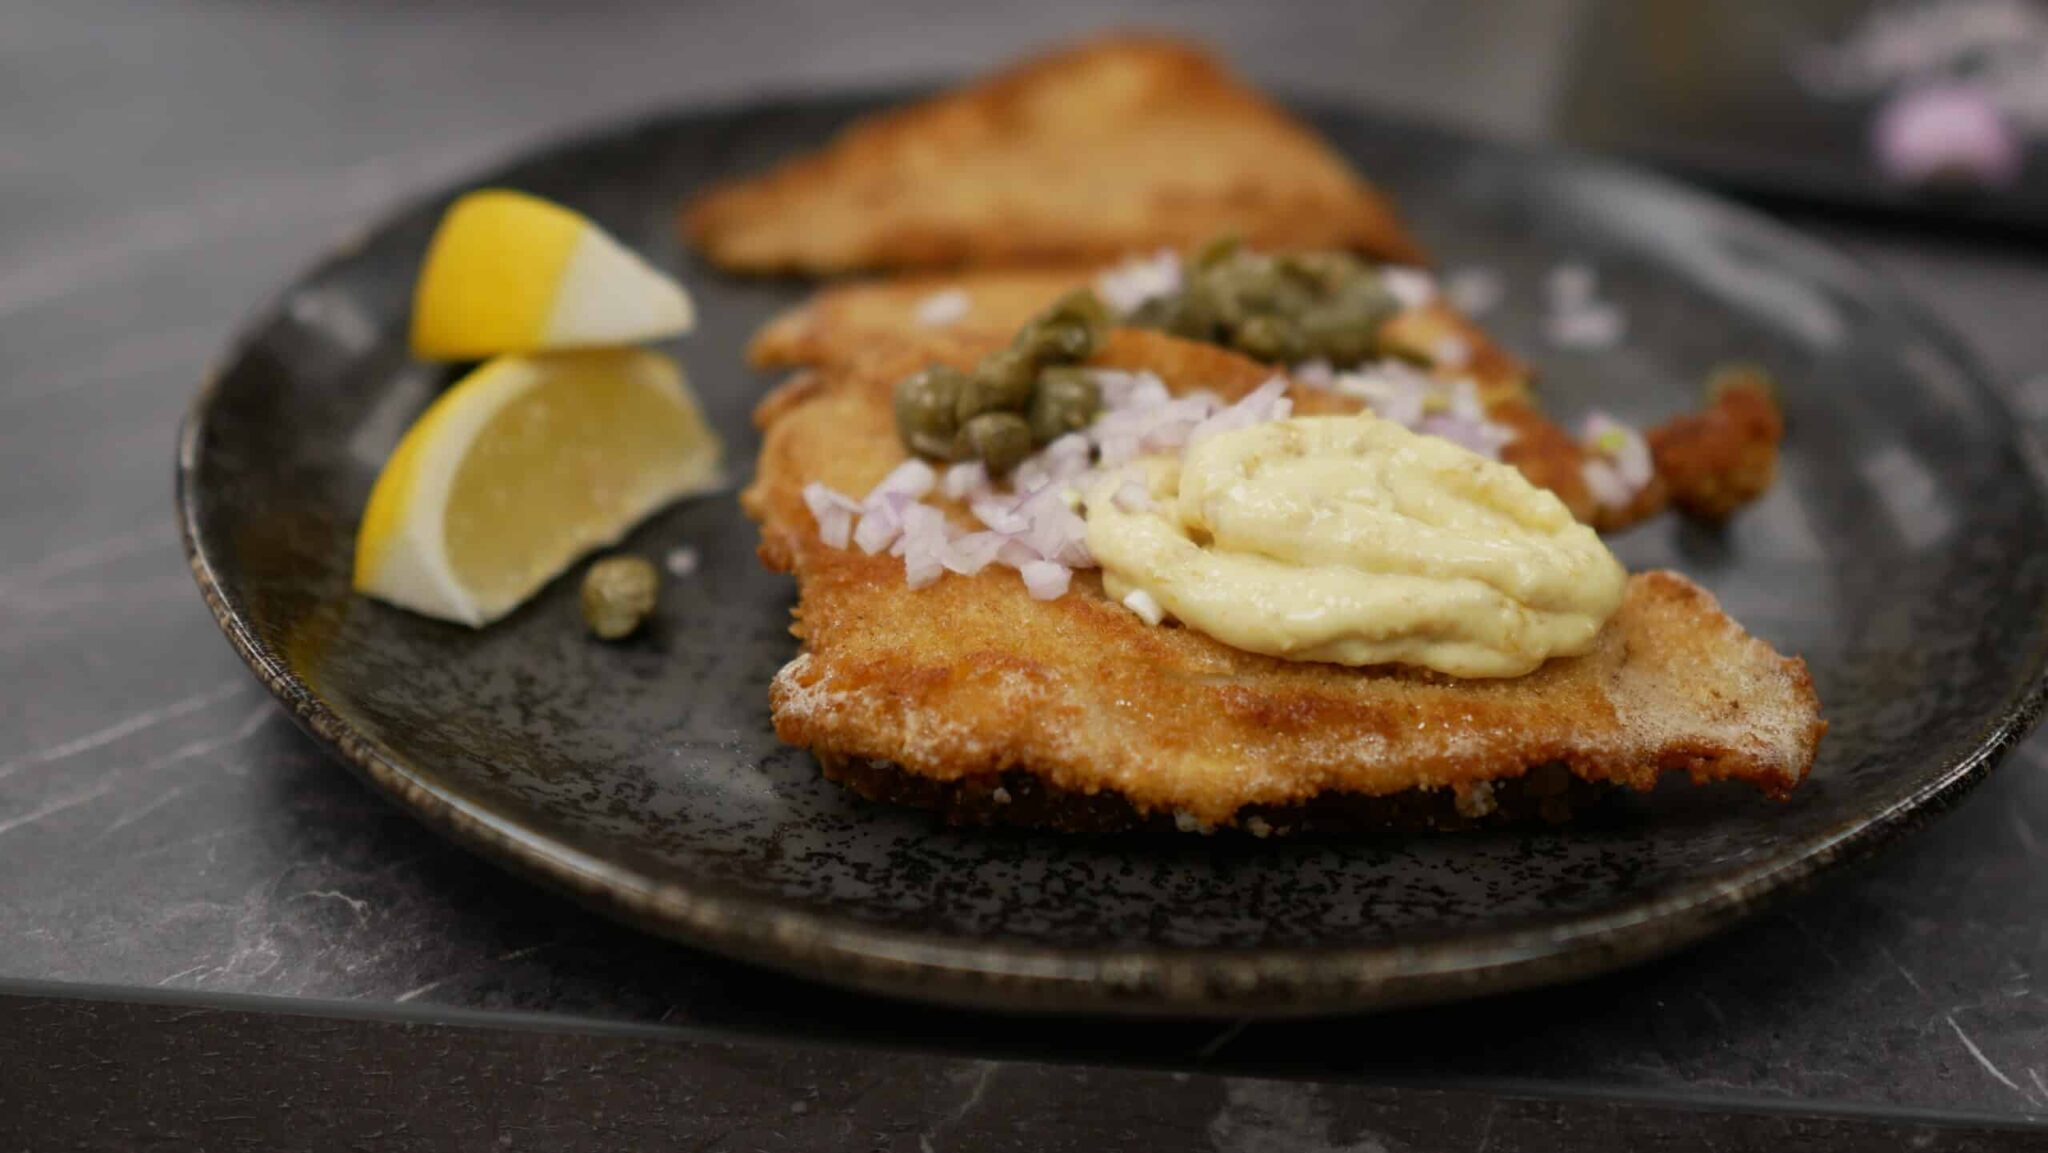 Ready-fried fish fillet with remoulade, capers, lemon and onions